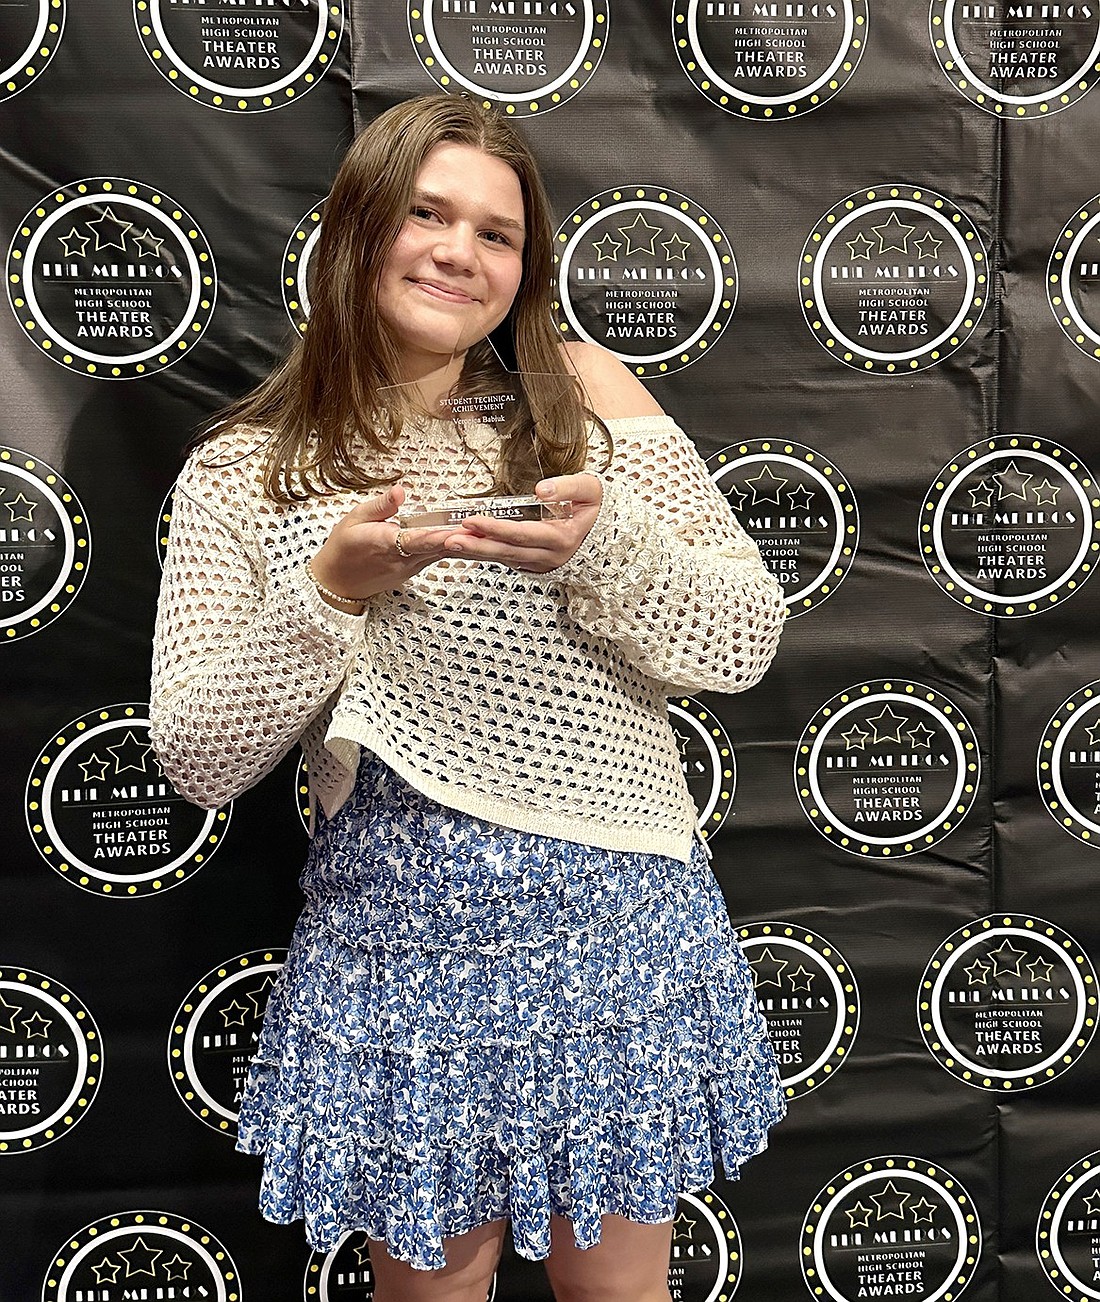 As a first-time nominee representing the Blind Brook High School Drama Club crew, junior Veronica Babiuk holds up the Metro Award she won on Monday, June 10, as stage manager for their spring production of “Mamma Mia!”